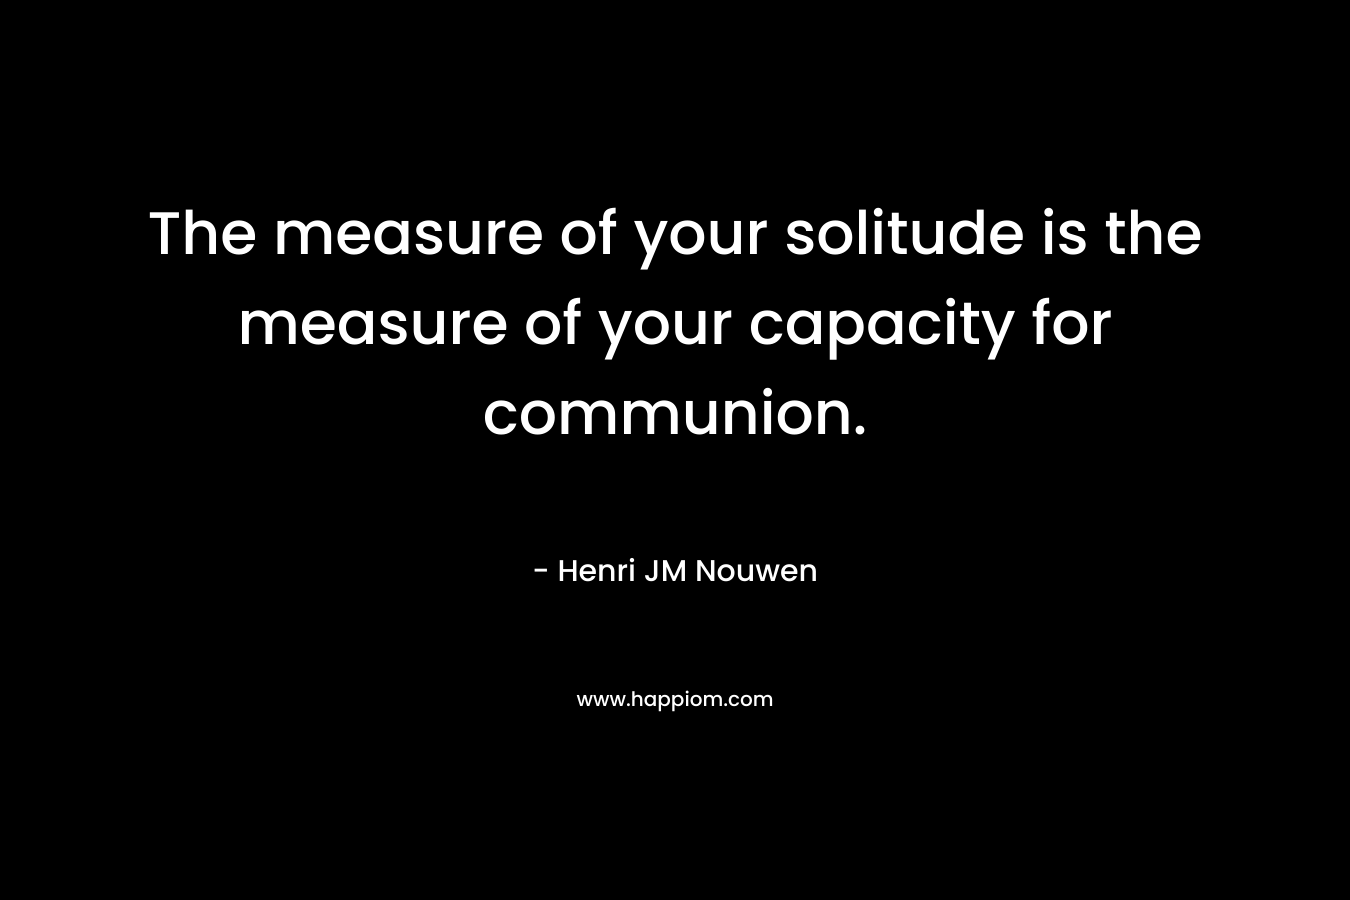 The measure of your solitude is the measure of your capacity for communion.